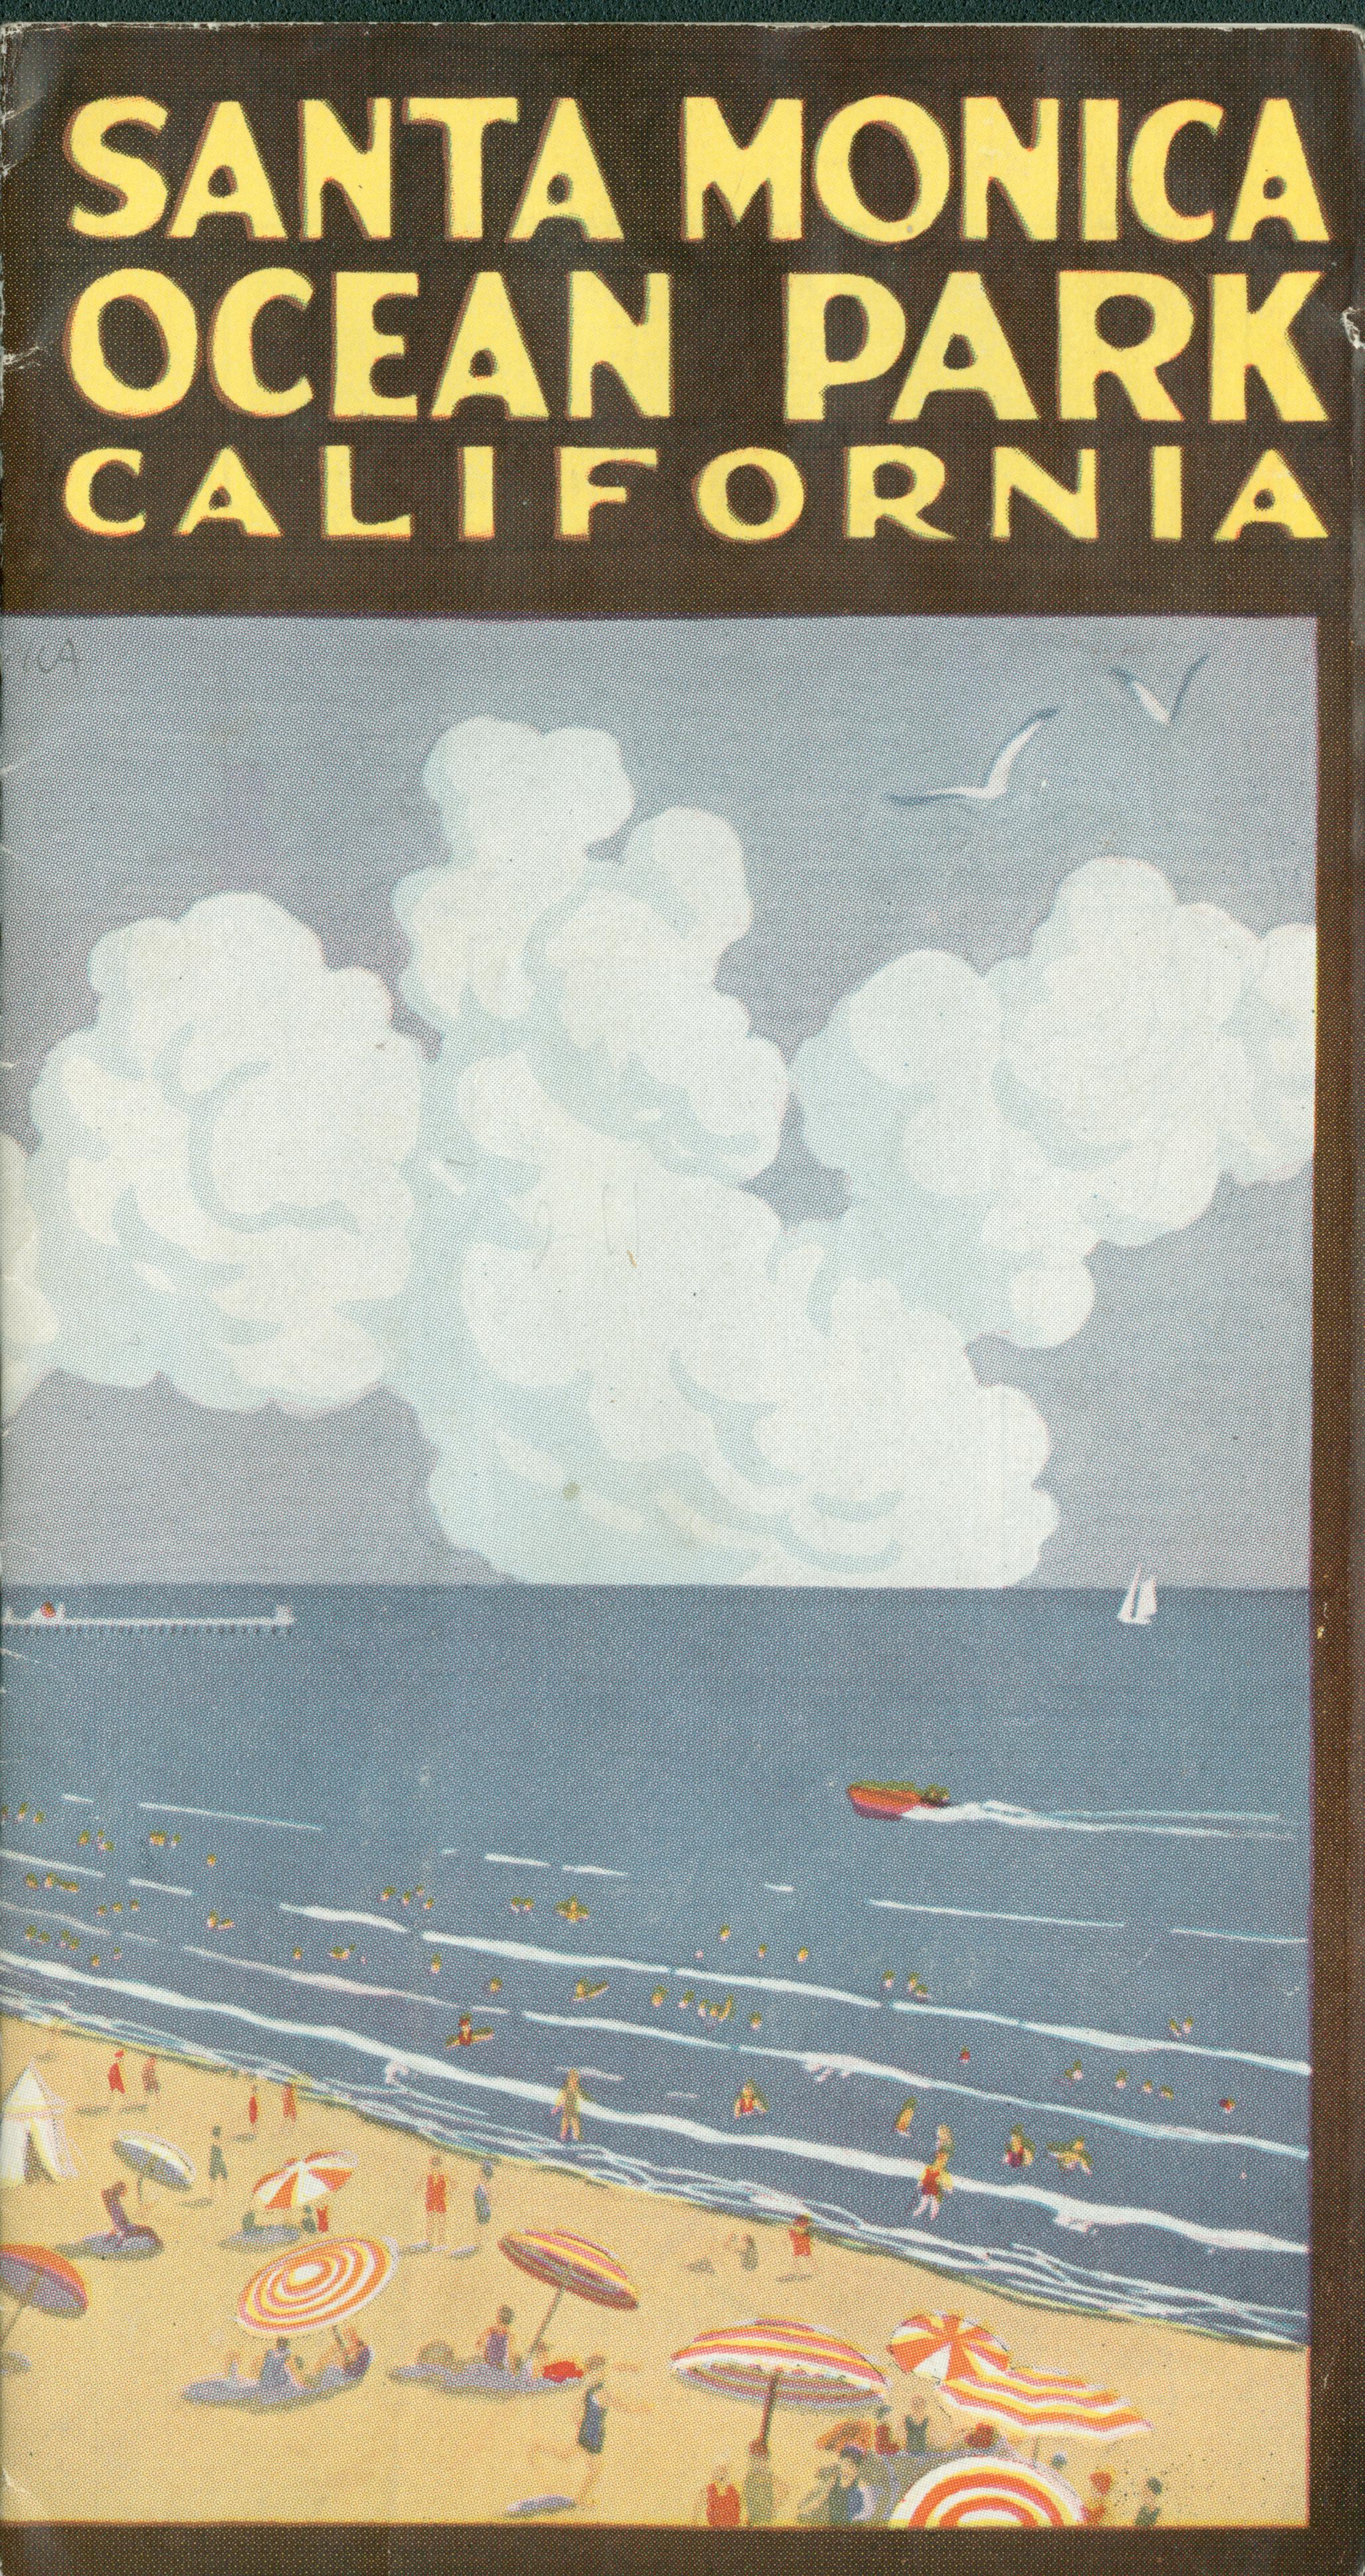 The front of this brochure shows a beach with people frolicking in the waves and boats off the shore.